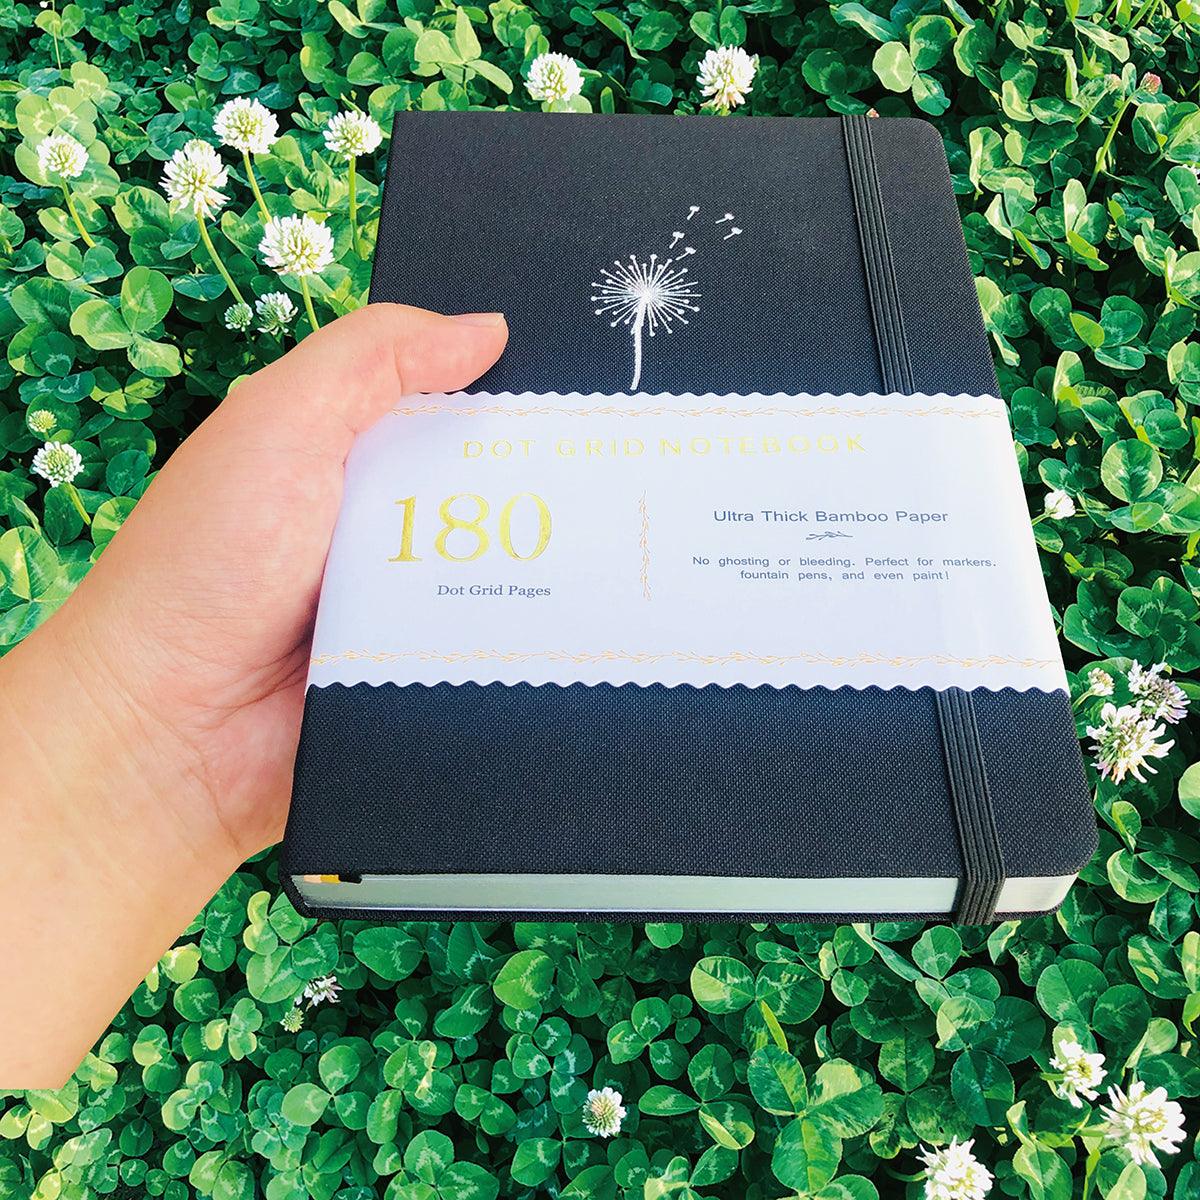 180gsm Bamboo Paper A5 Dandelion Dotted Notebook Dotted Journal Bullet Journal - bukenotebook